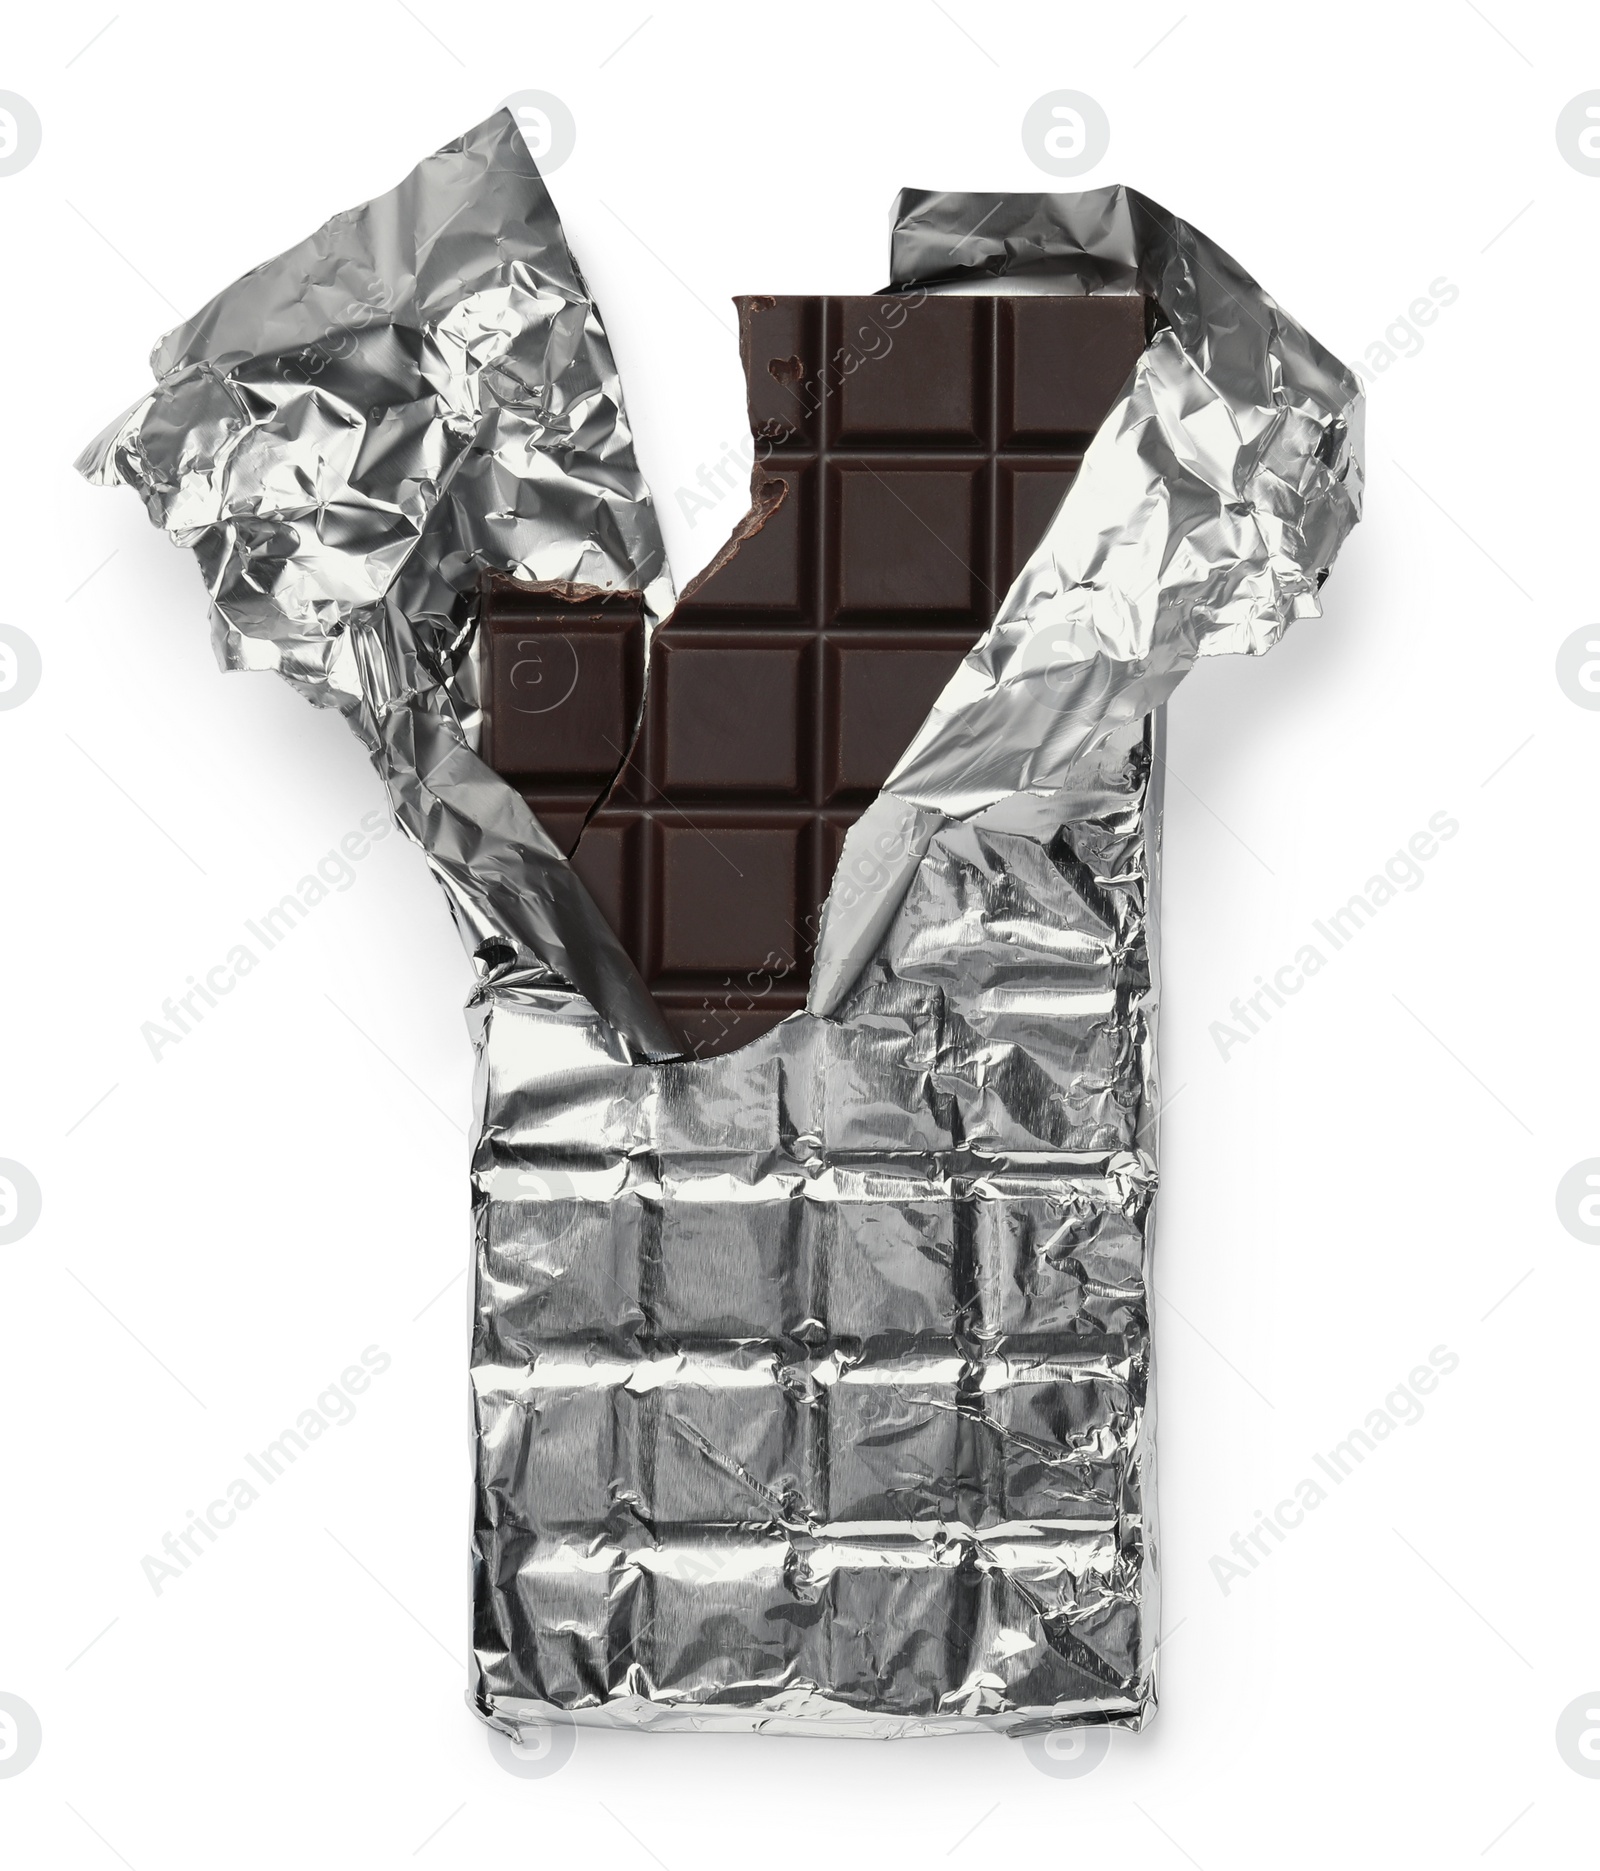 Photo of Broken dark chocolate bar wrapped in foil isolated on white, top view